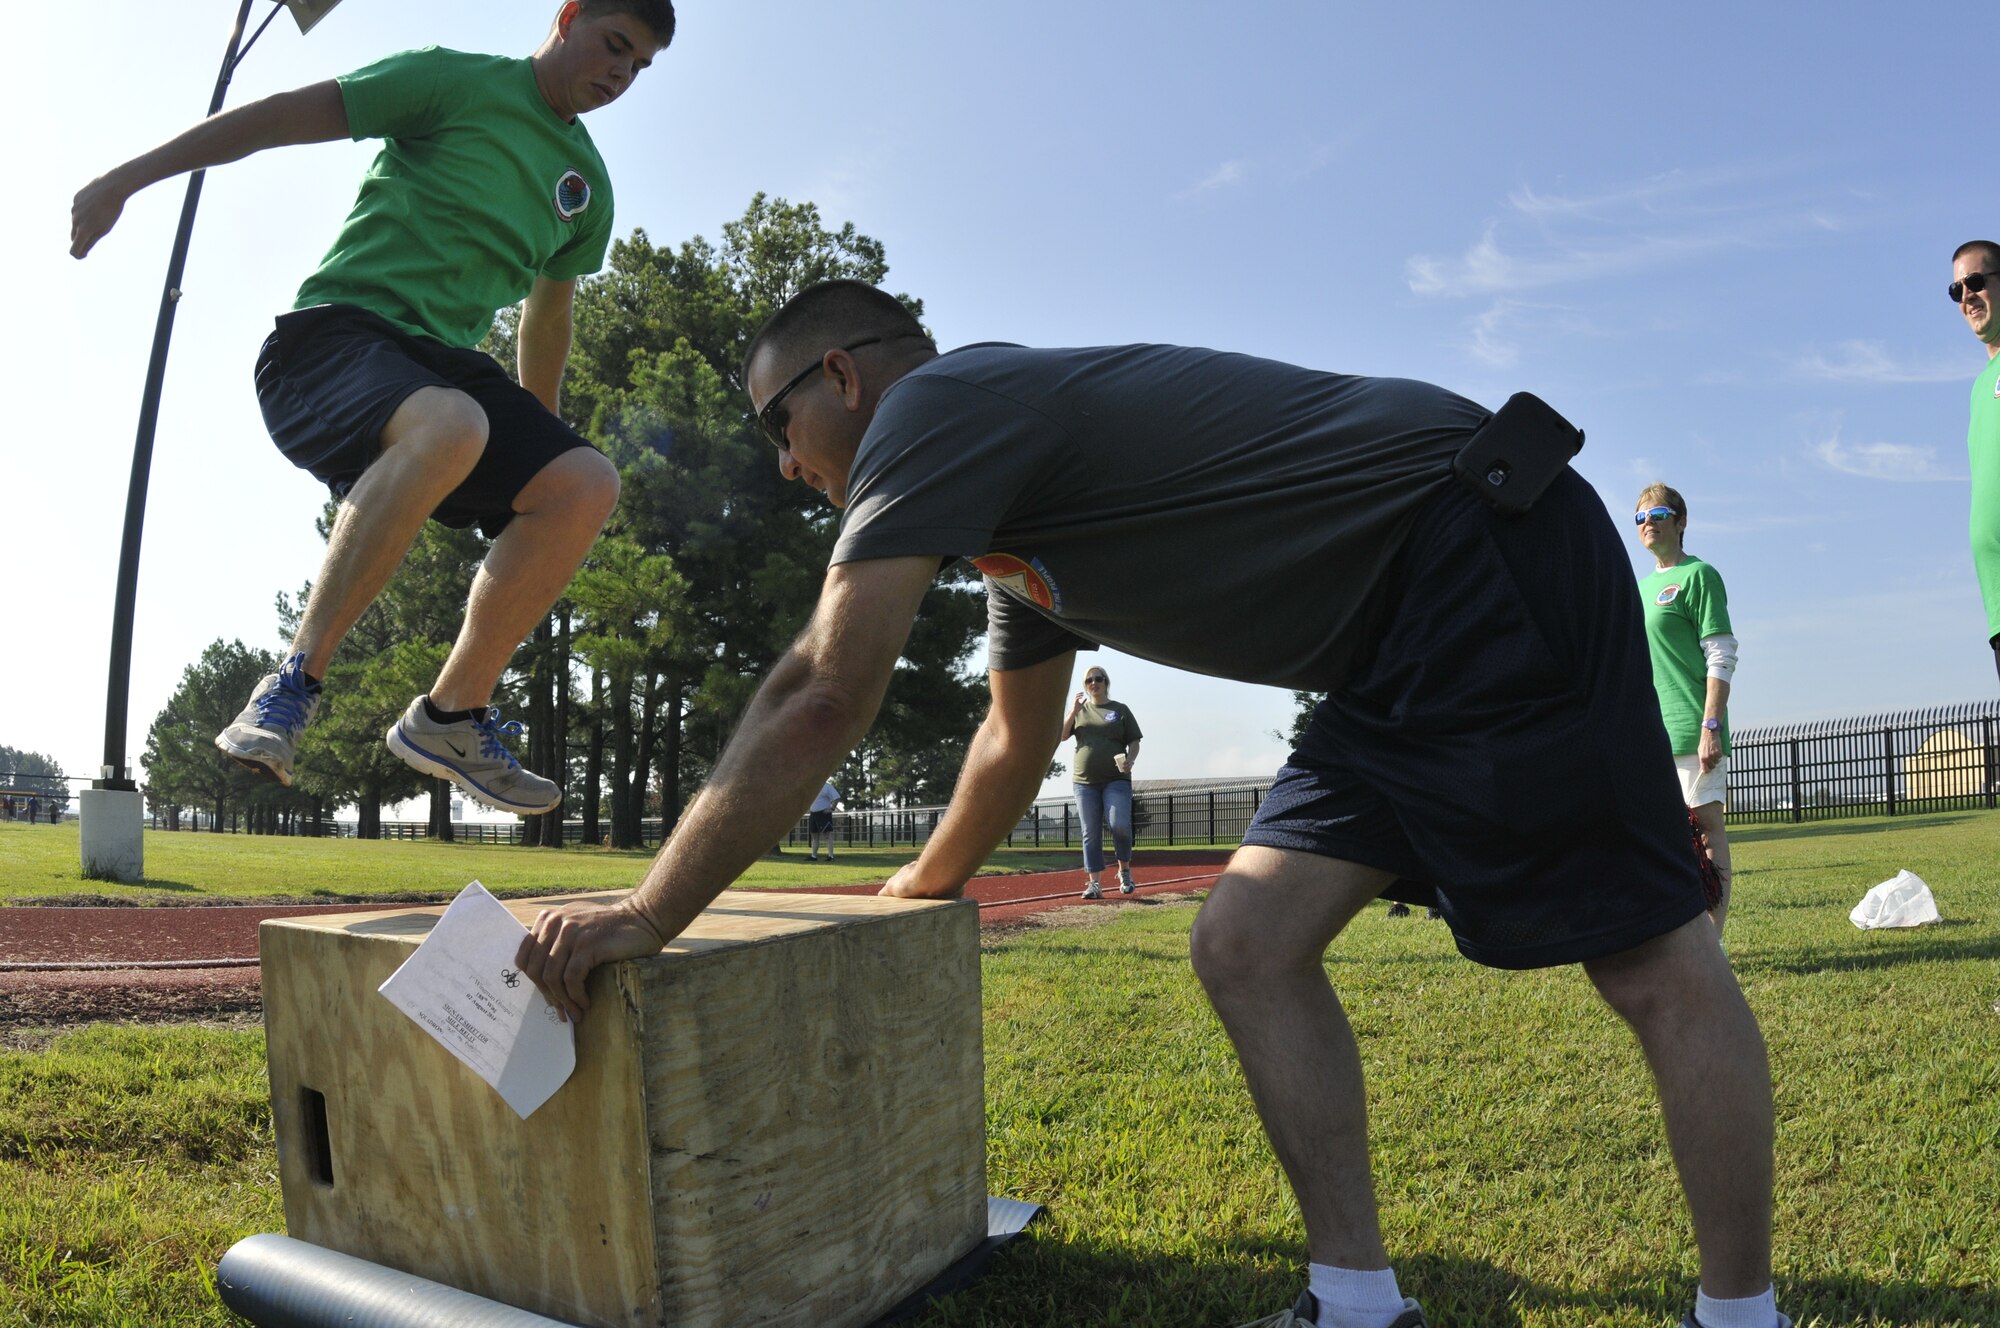 Members of the 188th Wing participate in a Wingman Day relay event held at Ebbing Air National Guard Base, Fort Smith, Arkansas, Aug. 2. The purpose of the event was to foster teamwork and cohesiveness in the unit. (U.S. Air National Guard photo by Staff Sgt. John Suleski/released)